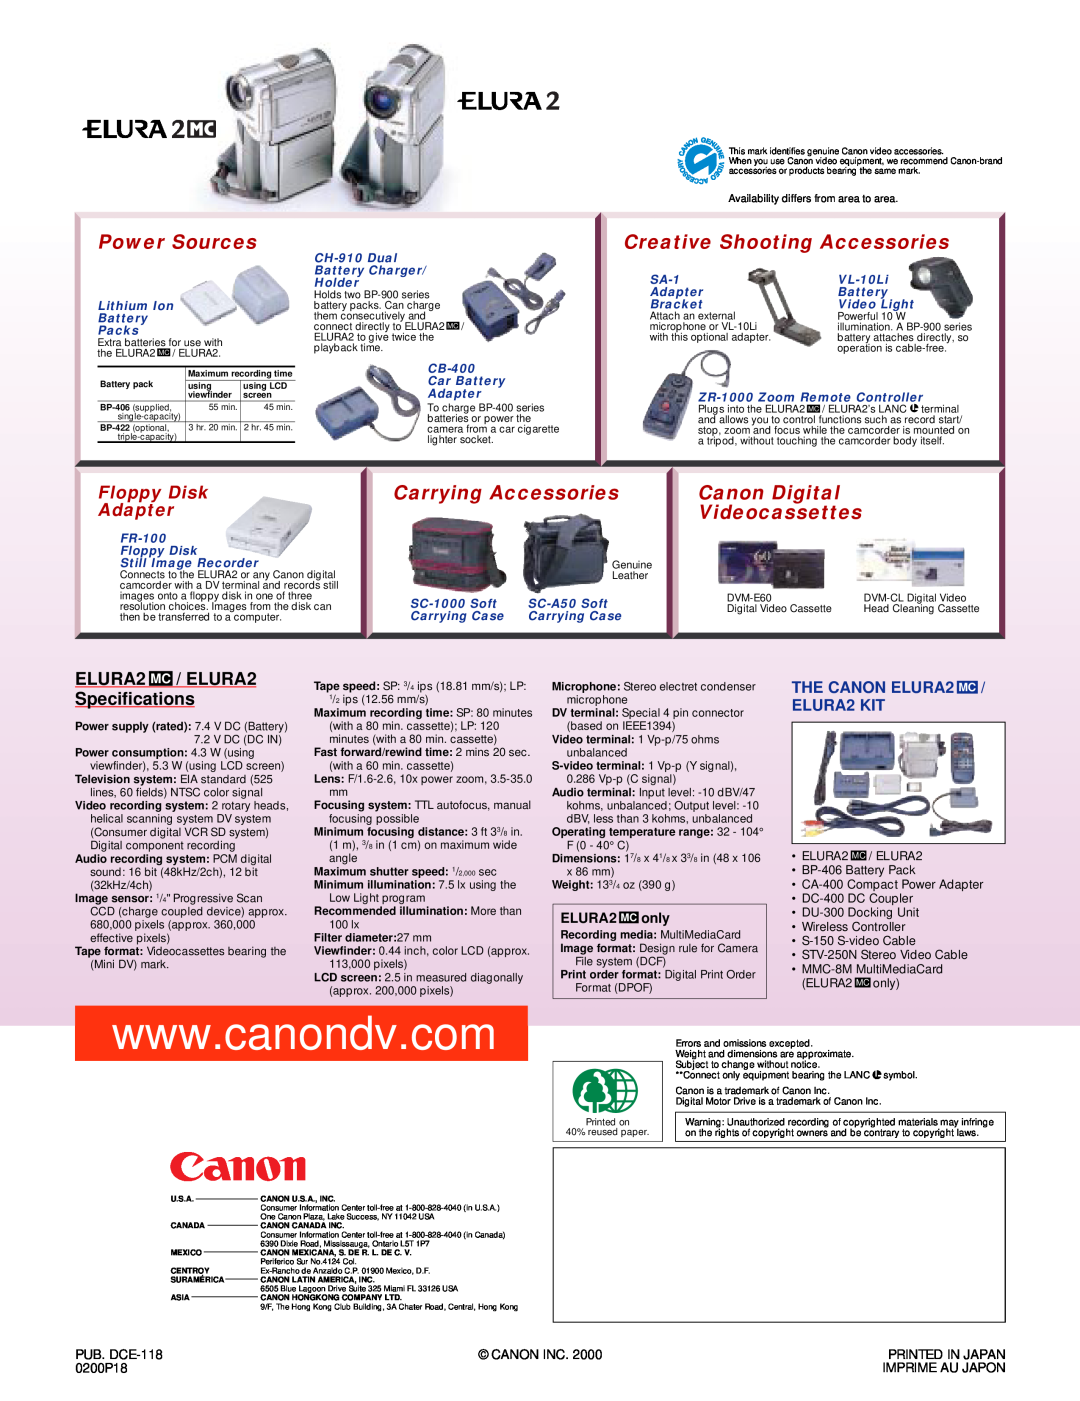 Canon ELURA2, Specifications, Power Sources, Creative Shooting Accessories, Carrying Accessories, Canon Digital, only 